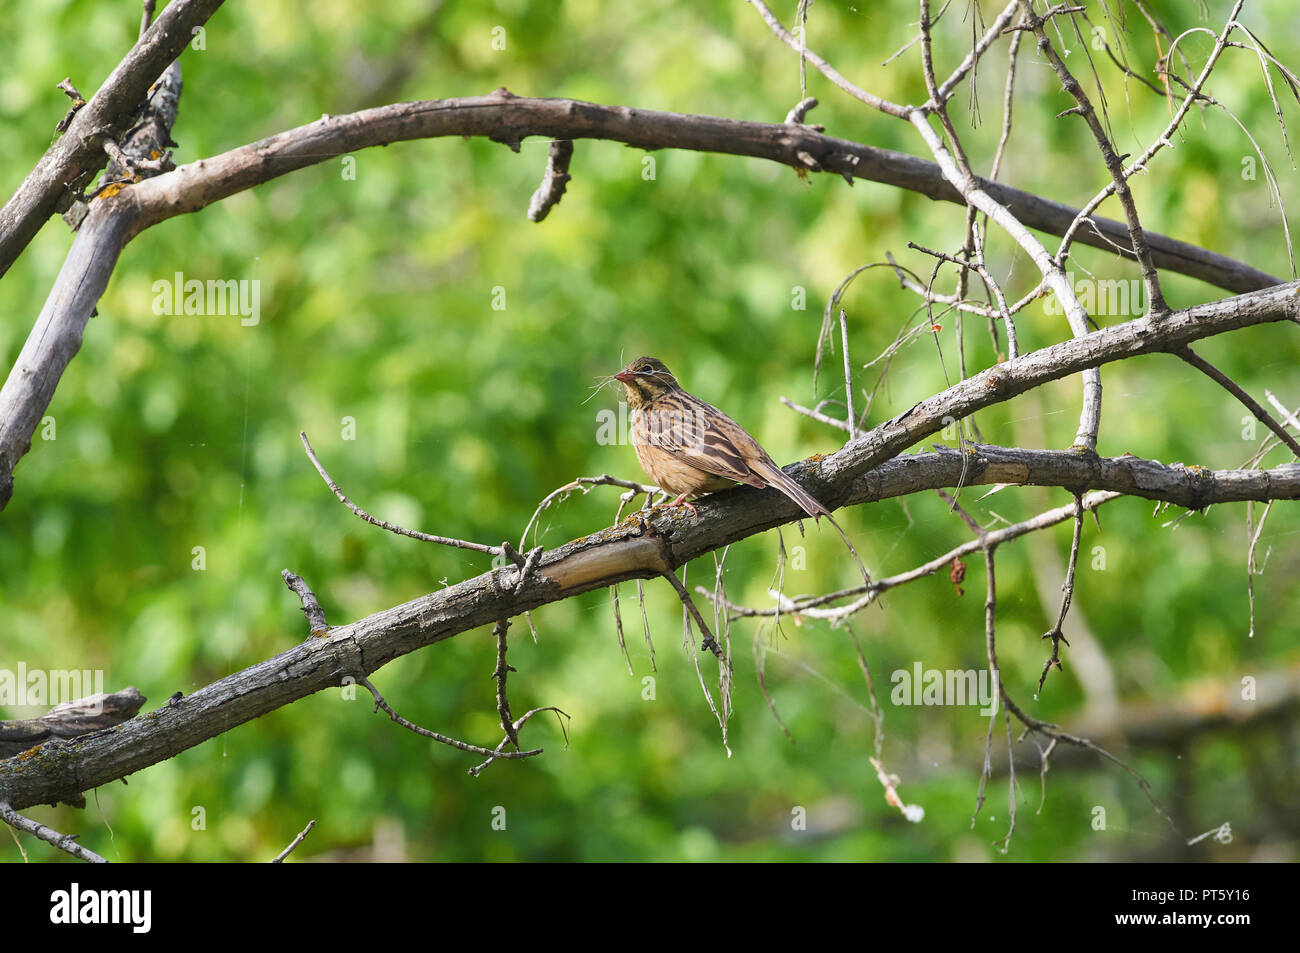 Ortolan (emberiza hortulana) sits on a branch with a bunch of blades of grass in its beak to build a nest. Stock Photo